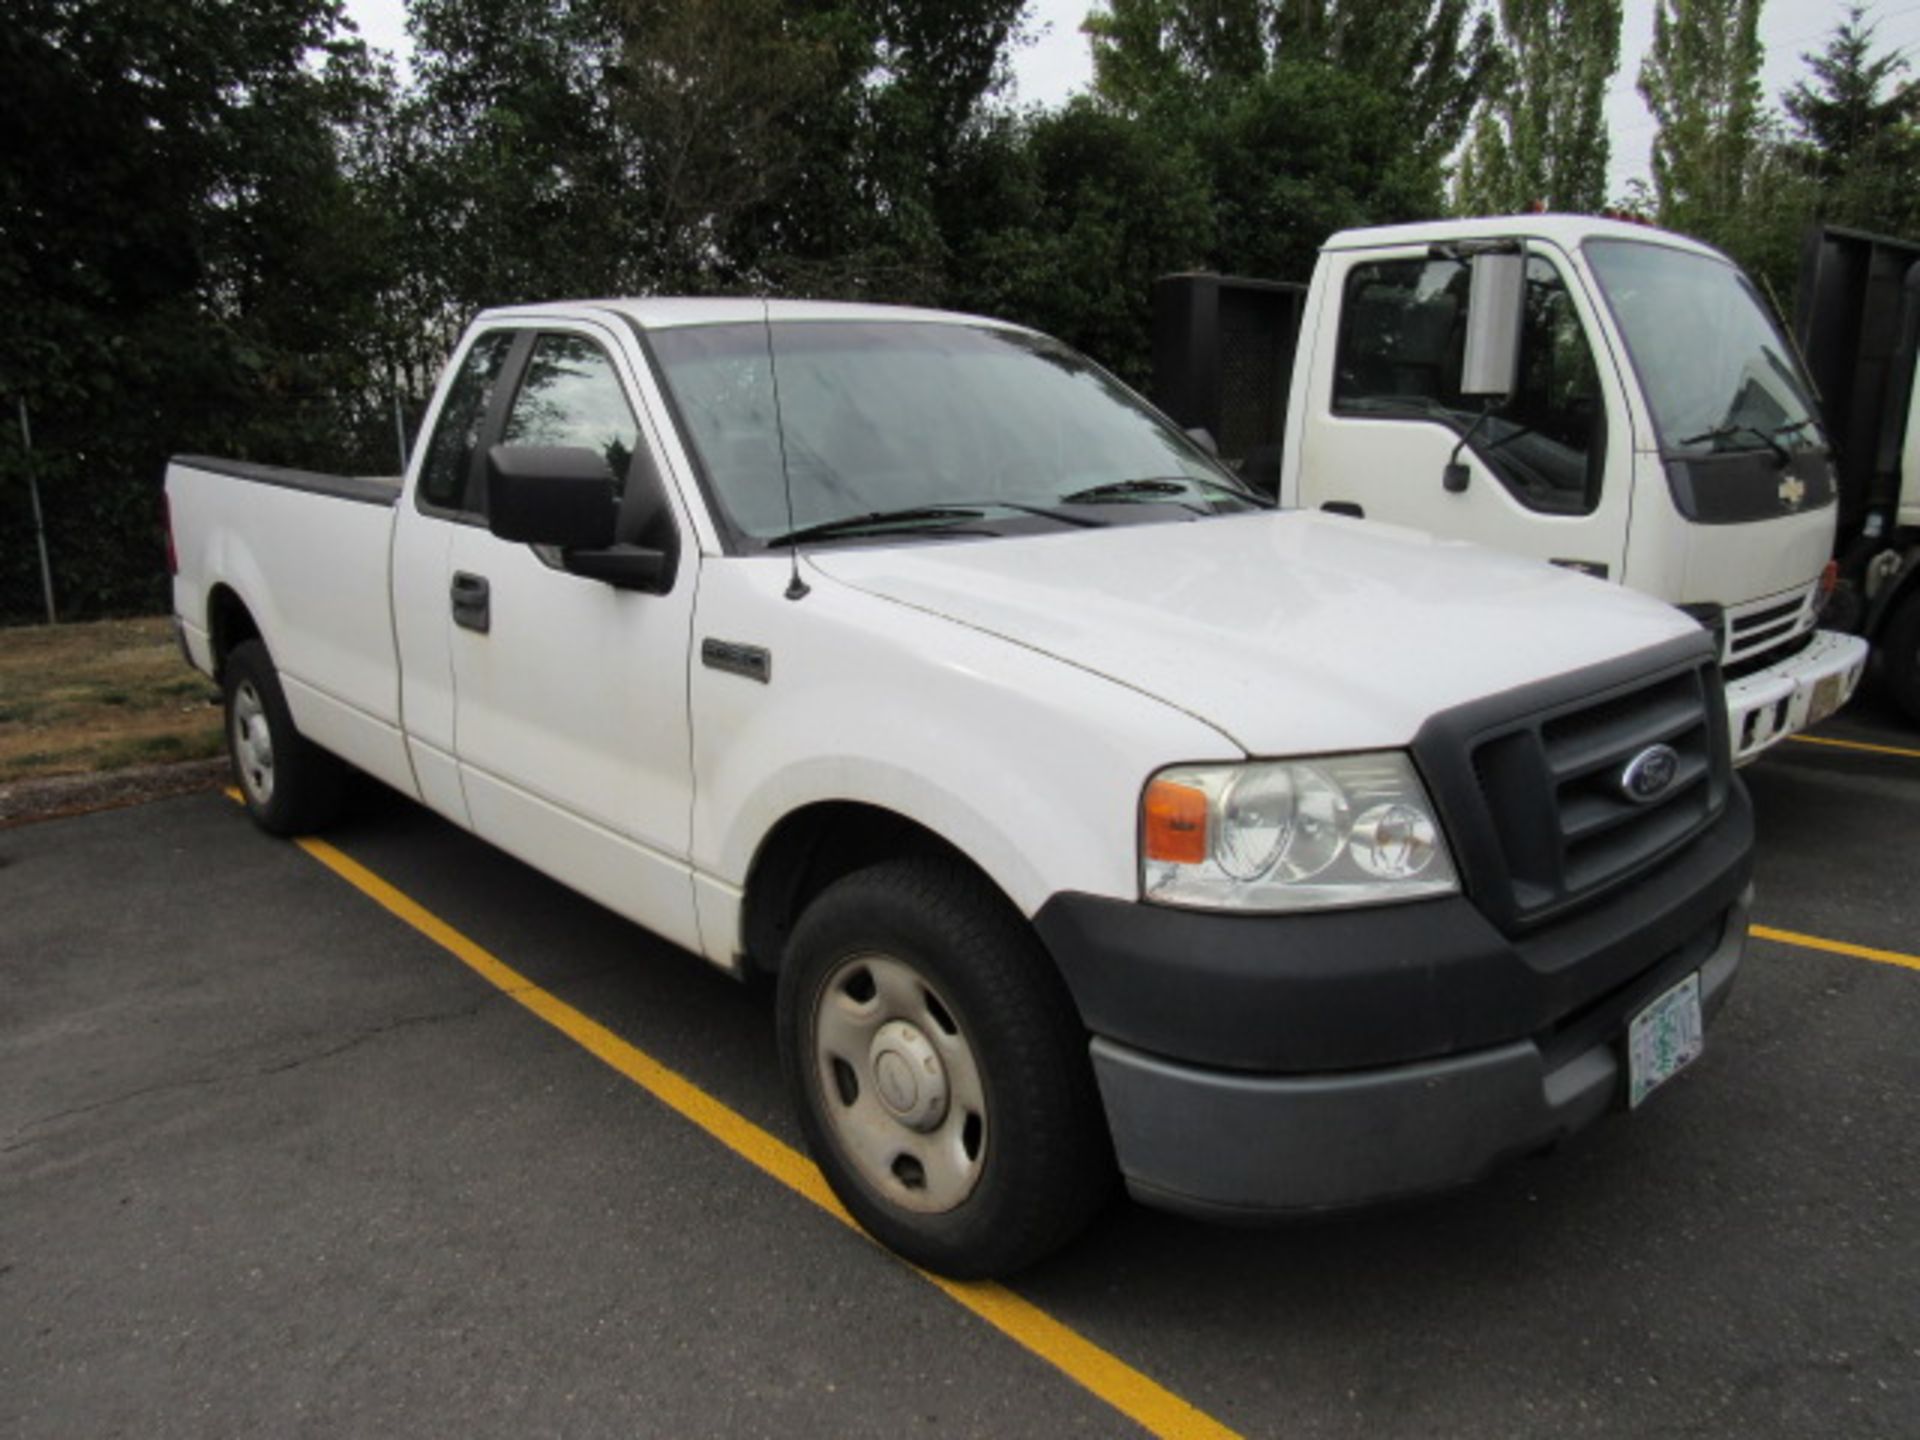 Ford F-150 Pickup Truck - Image 2 of 10